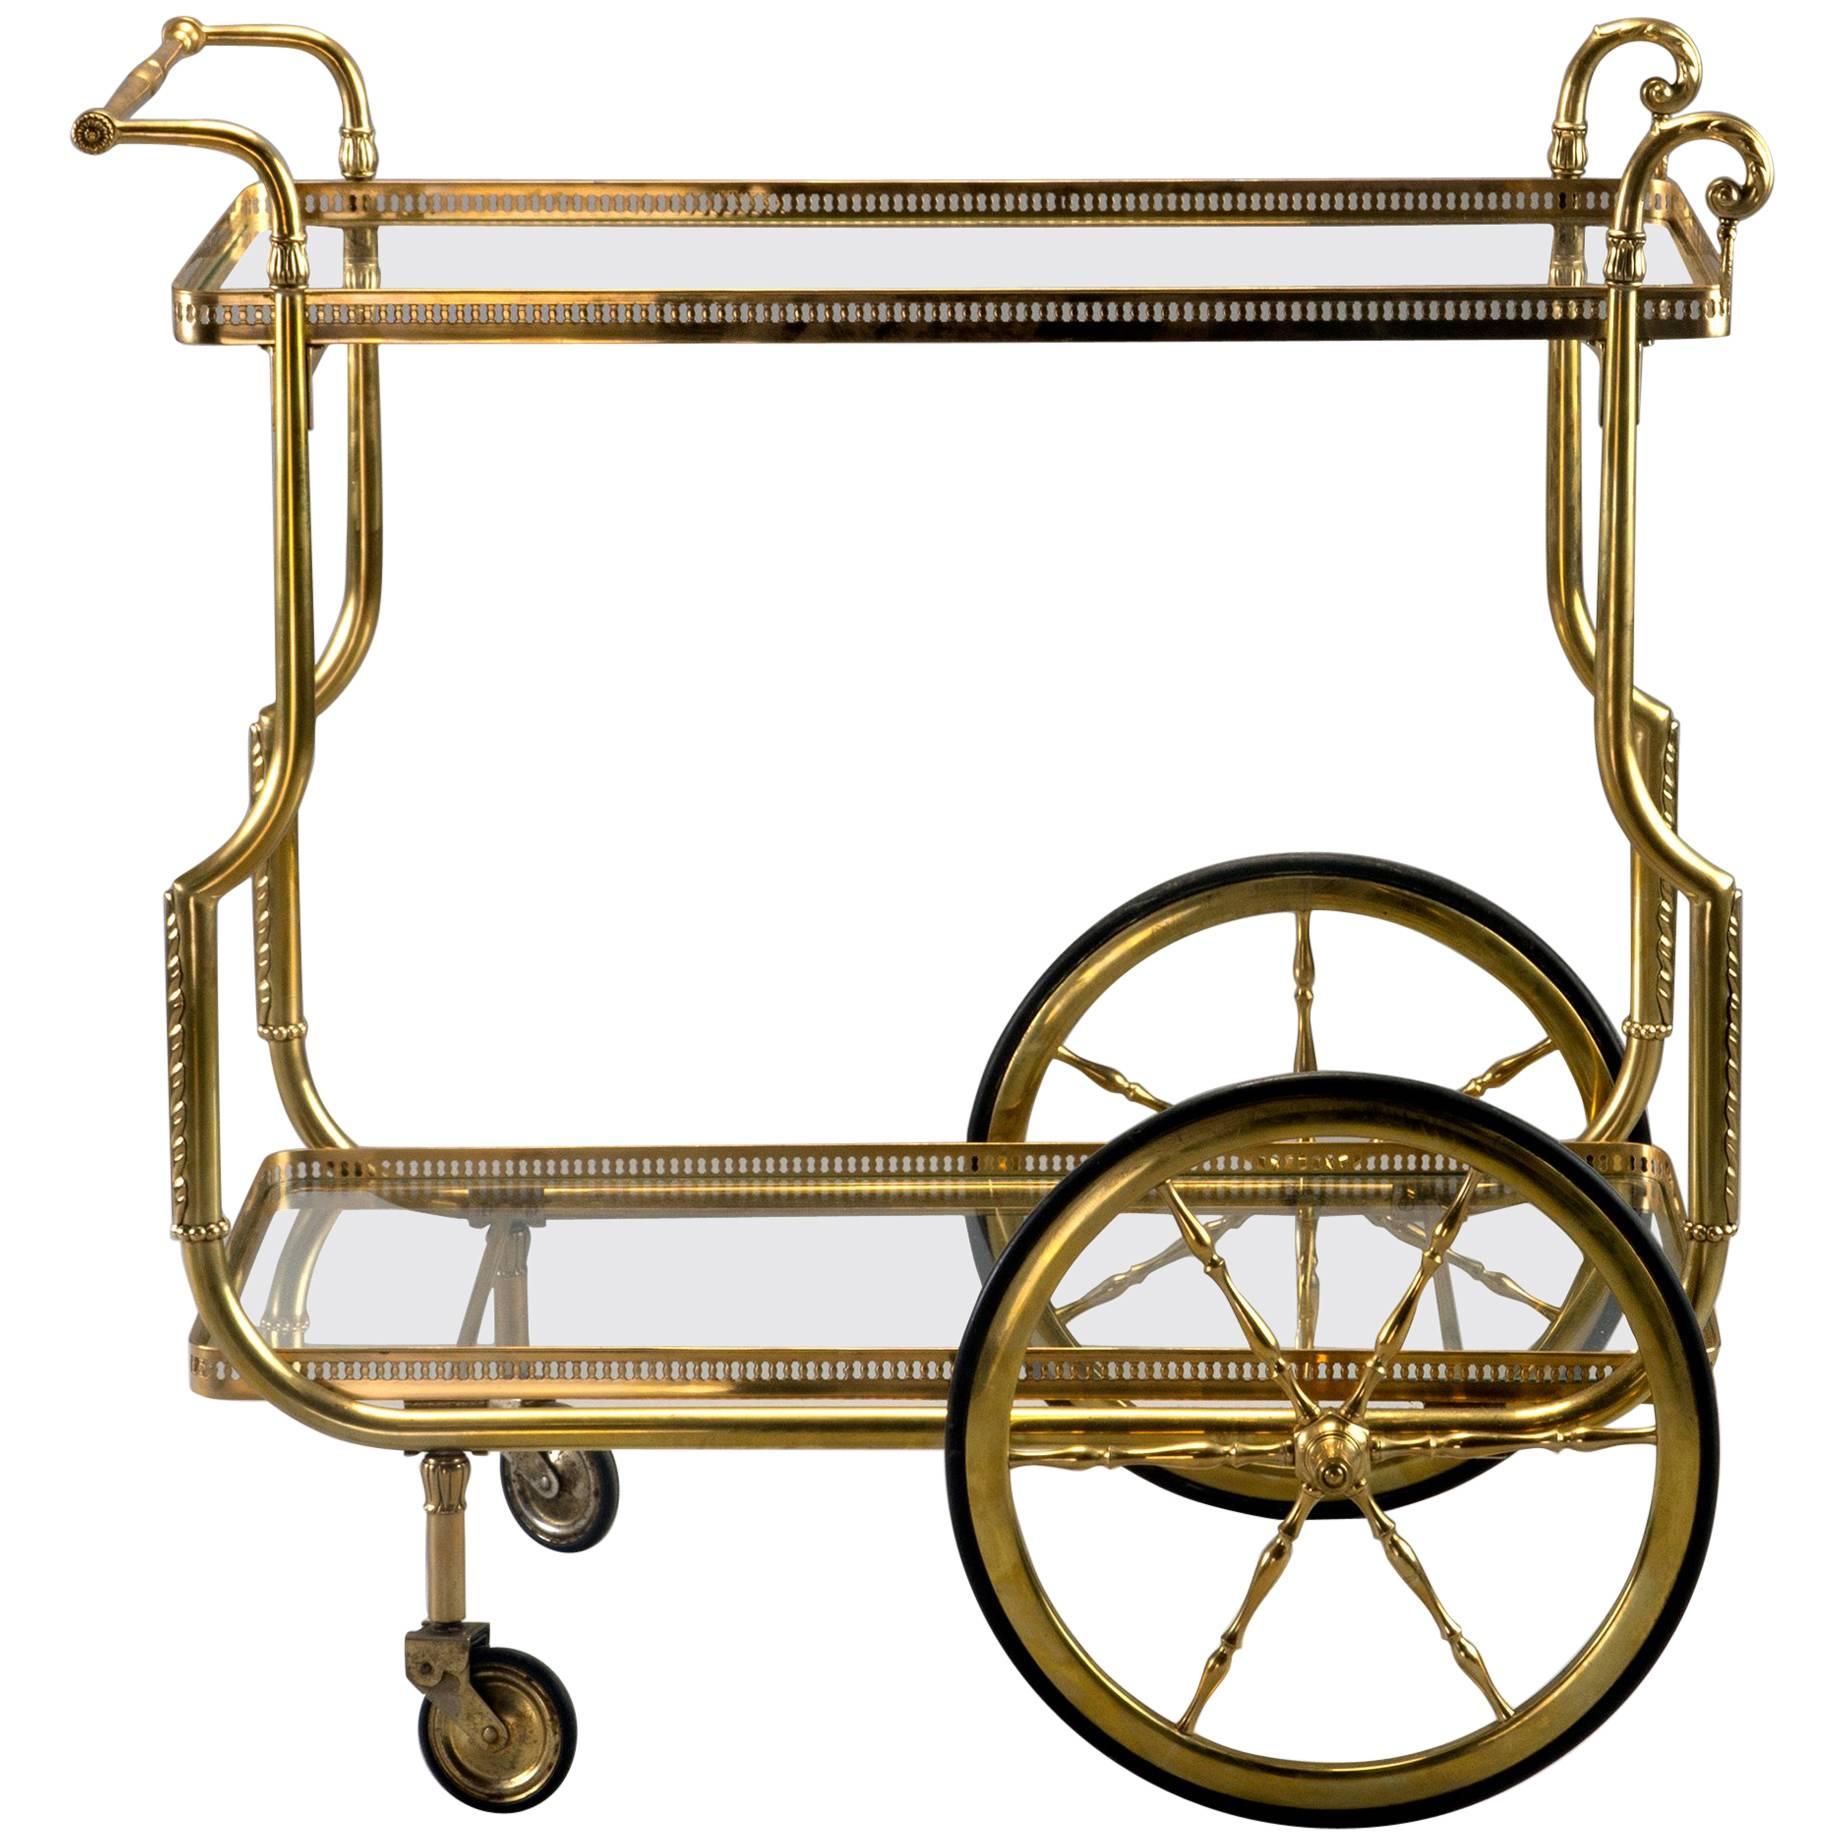 Brass and Glass Bar or Tea Trolley